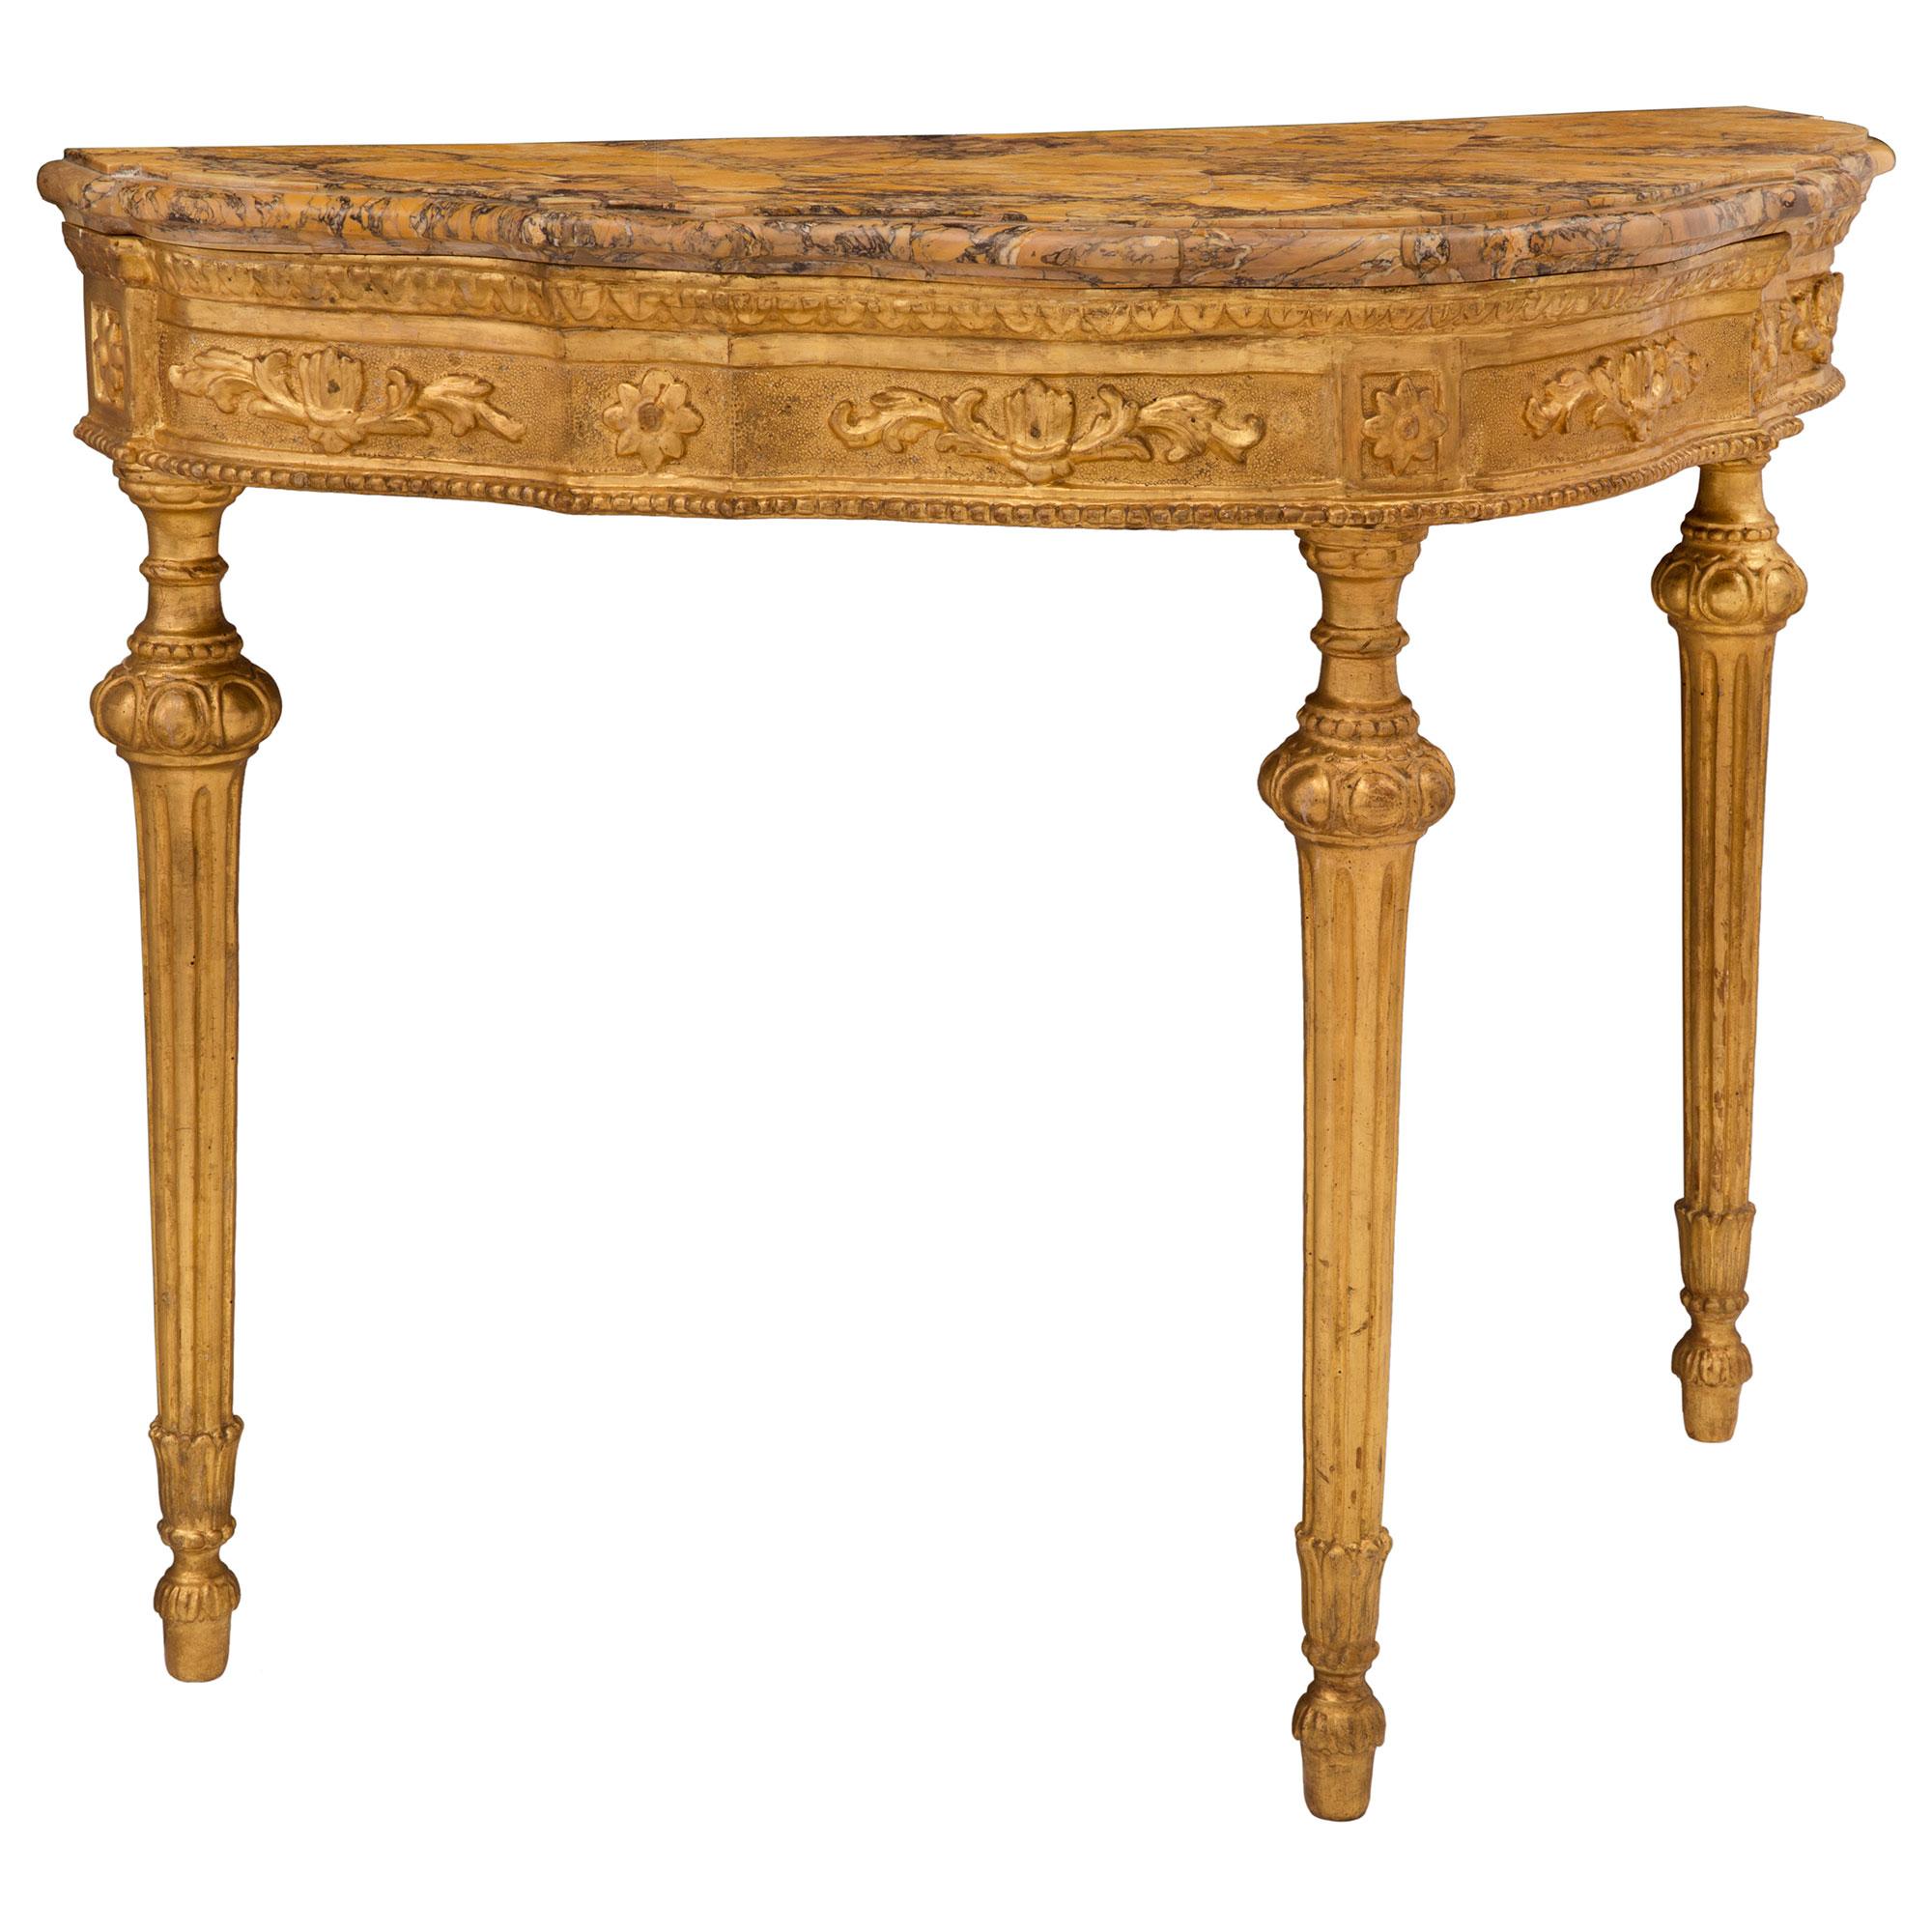 Italian Mid 18th Century Louis XVI Period Giltwood and Marble Console In Good Condition For Sale In West Palm Beach, FL